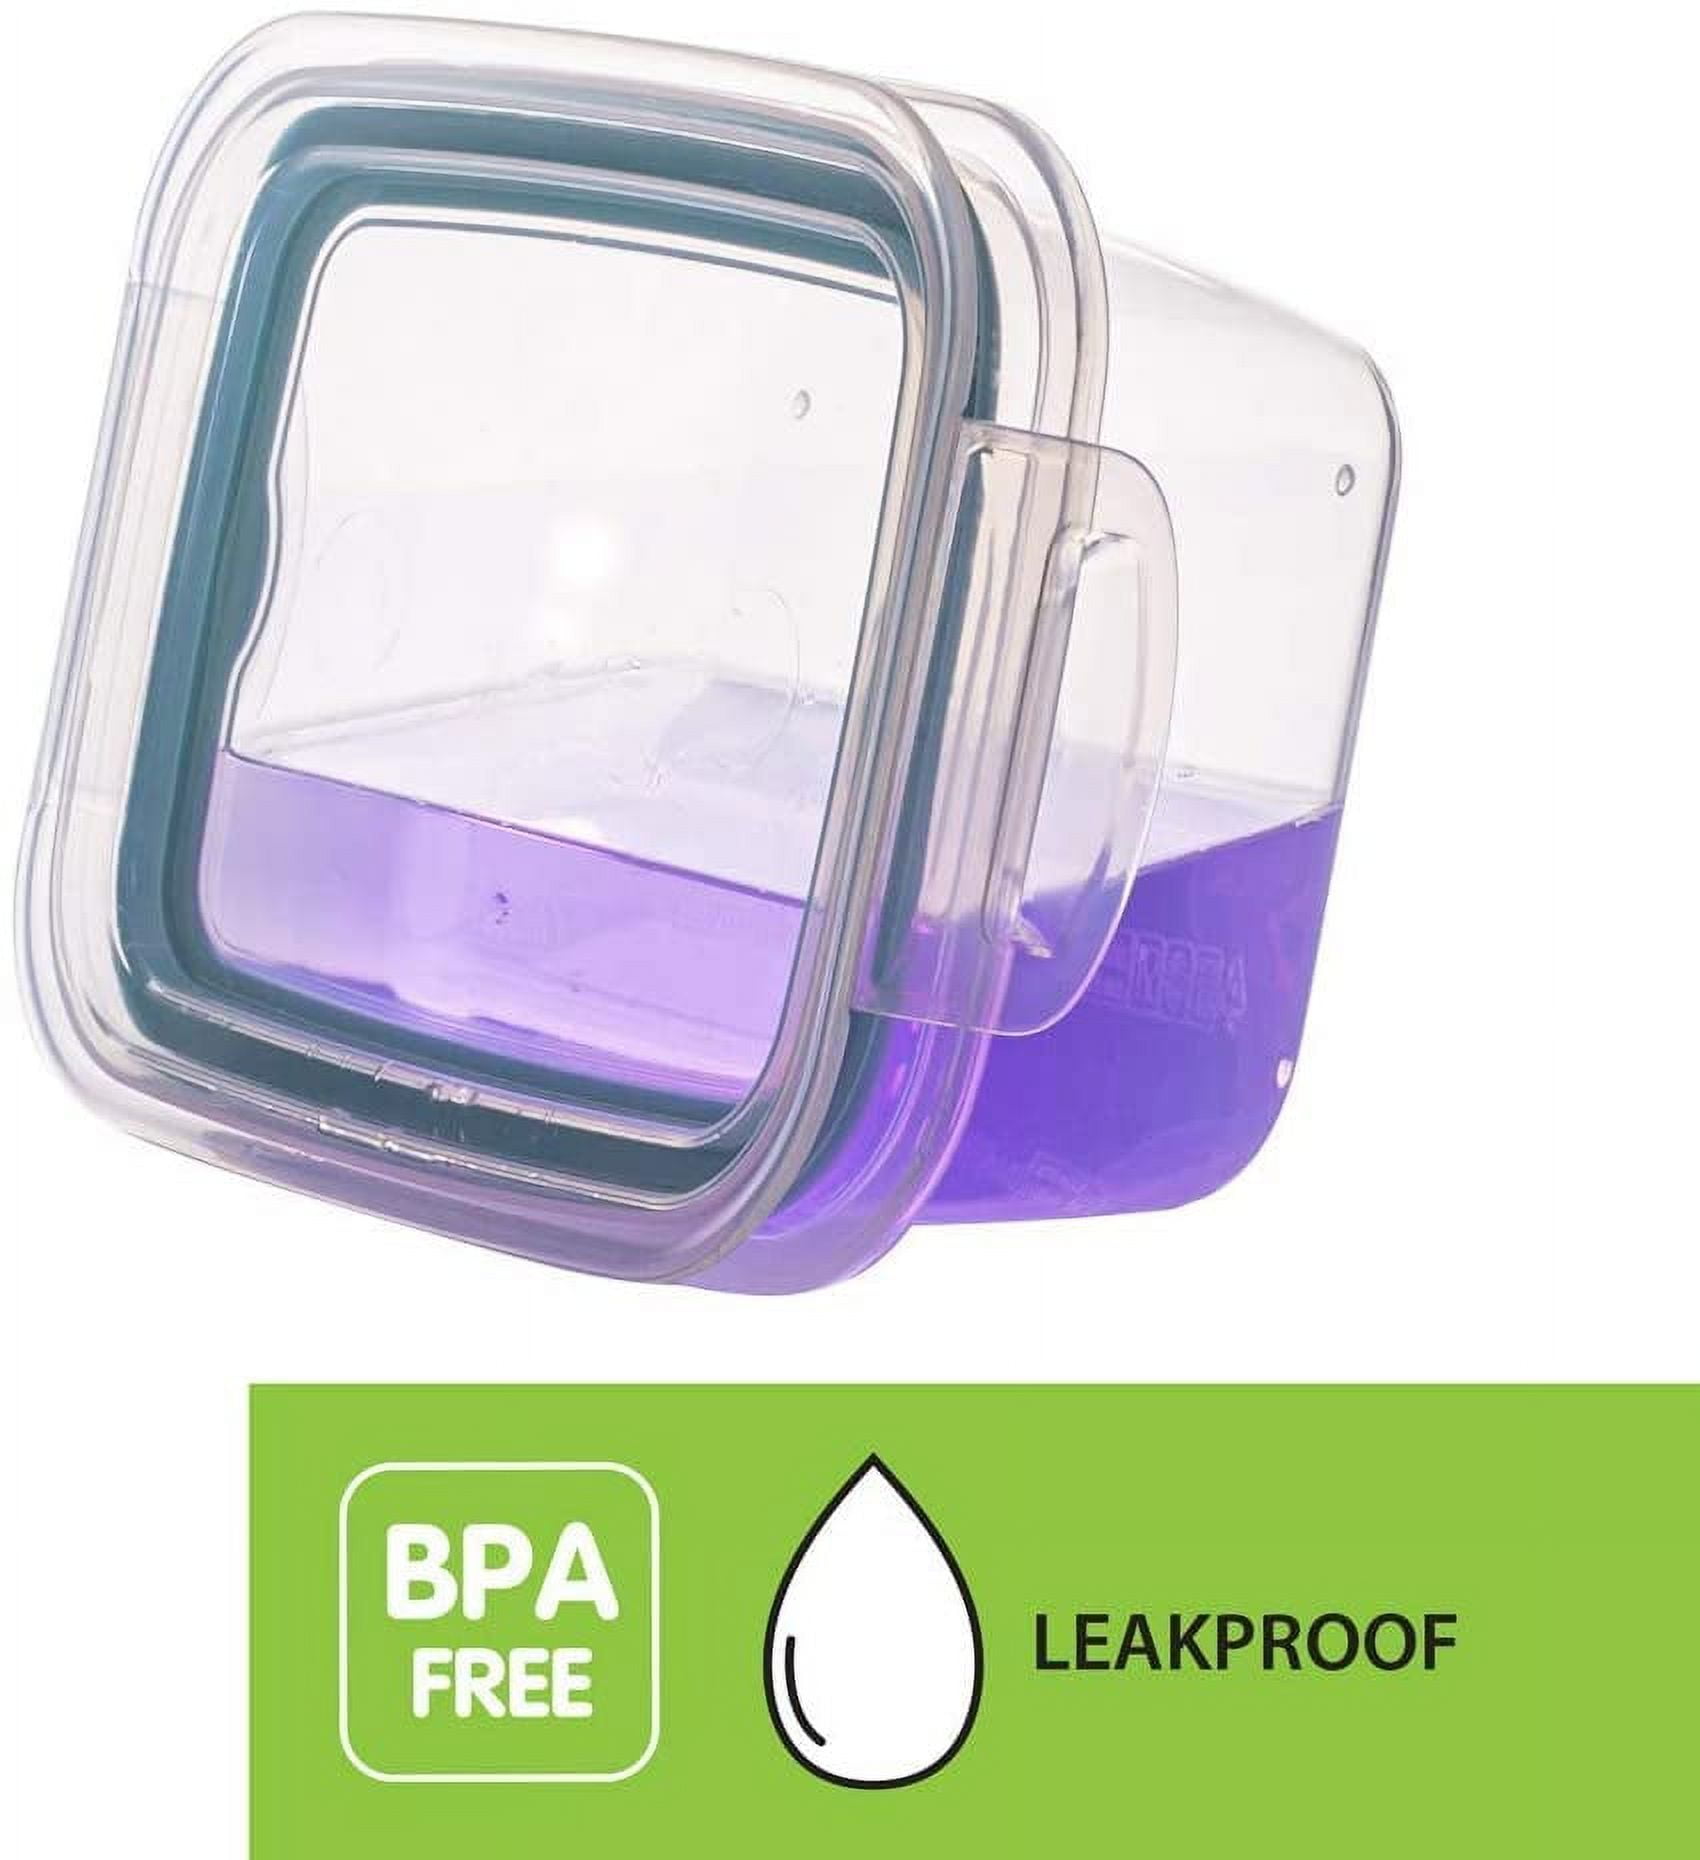 Air Tight Sealable Hermetic Plastic Containers for Food and Cereal Storage.  Perfect Lock Lids for Kitchen and Organization. Microwave/Freezer 